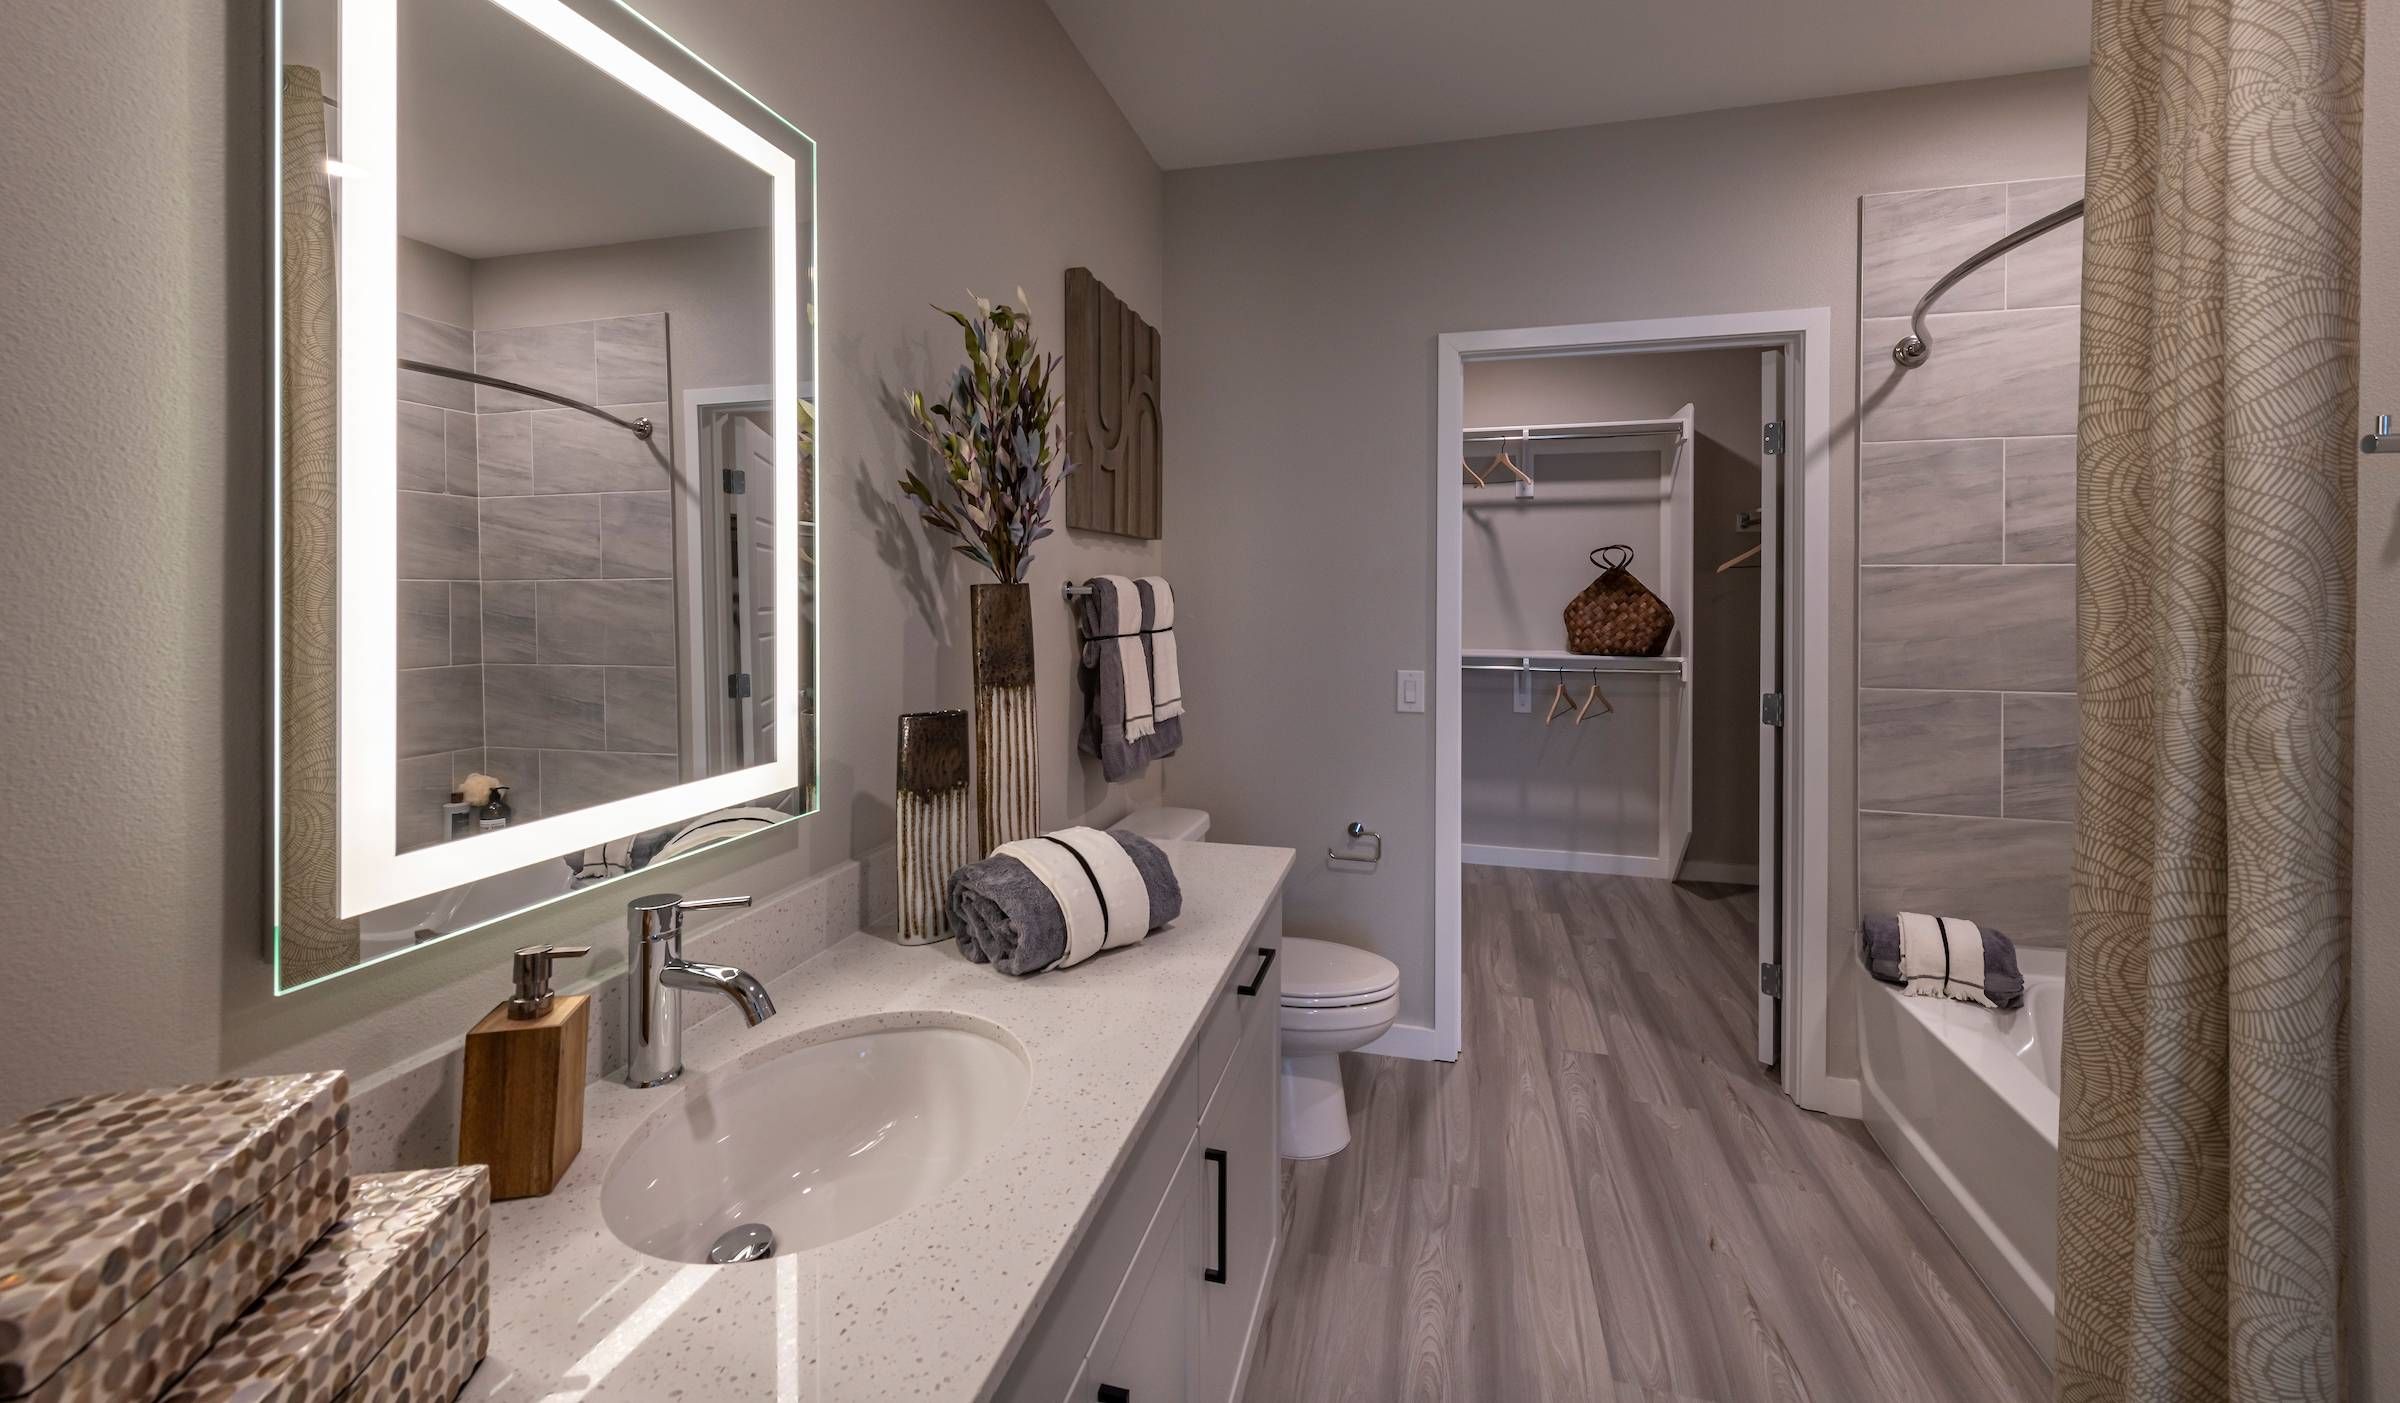 Bathroom in Alta Southern Highlands that showcases a lighted mirror, grey-toned finishes, and a spacious shower.